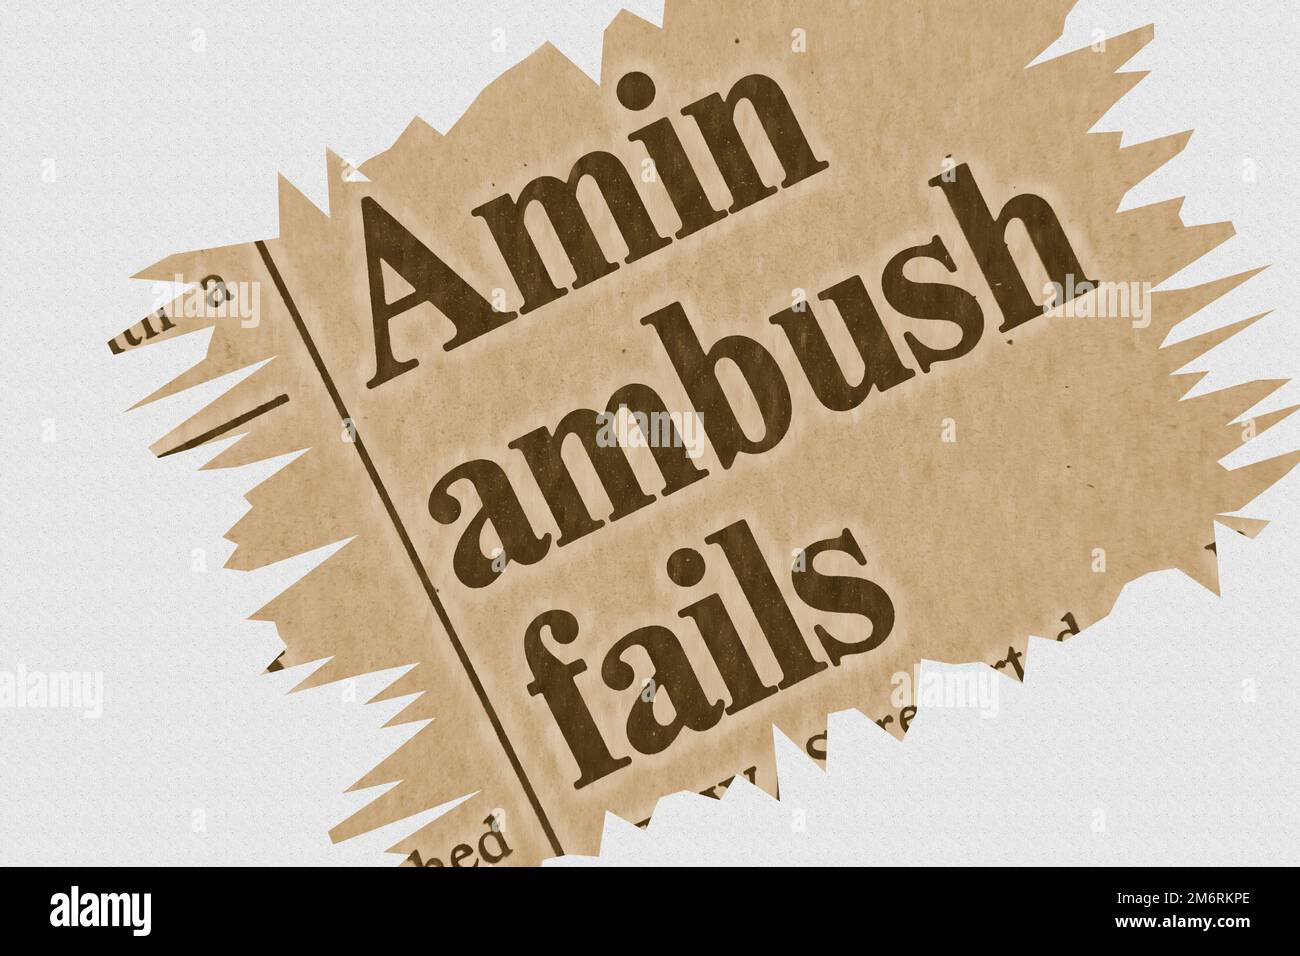 Amin ambush fails - news story from 1975 newspaper headline article title with highlight sepia overlay Stock Photo